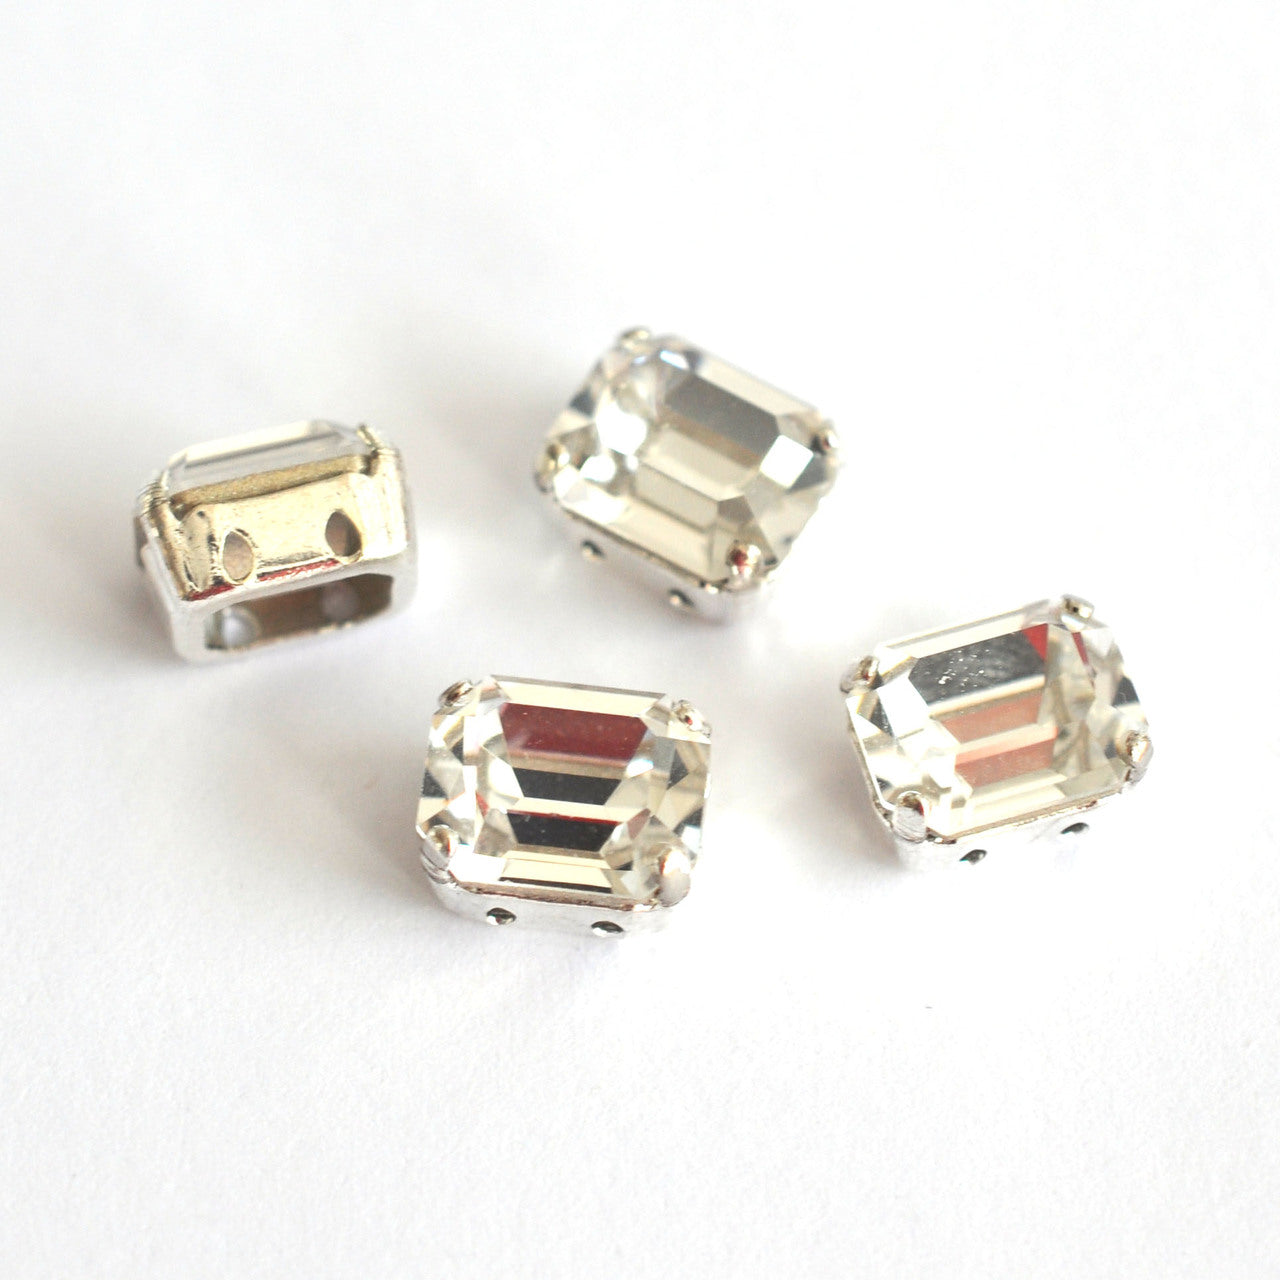 Crystal 10x8mm Octagon Sew On Crystals - 4 Pieces